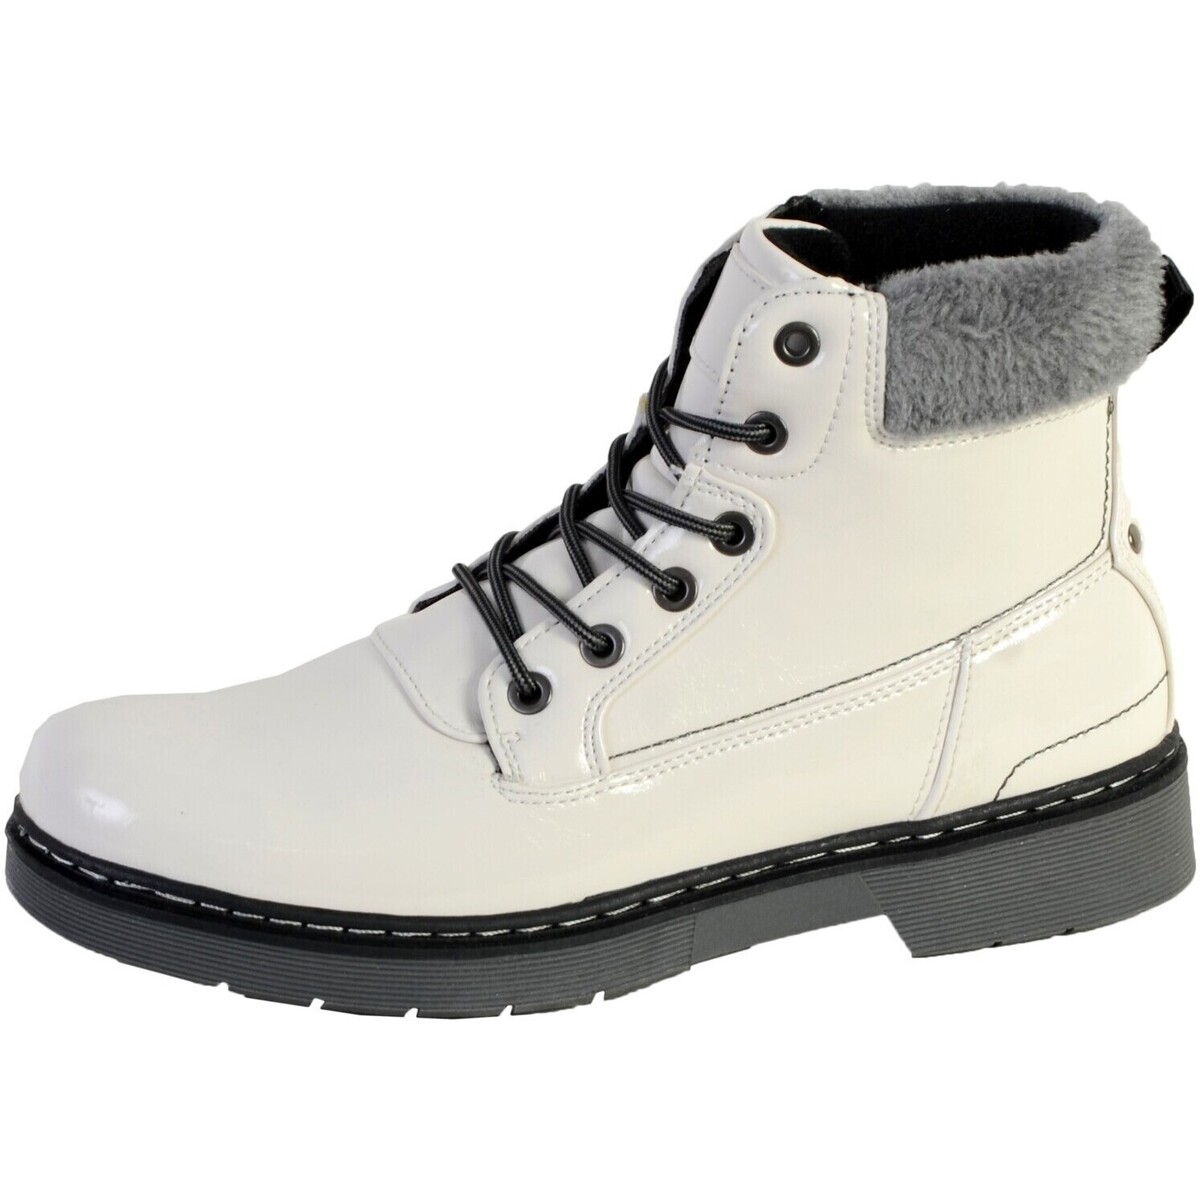 Chaussures Femme Boots lace-up The Divine Factory Boots lace-up CI3861 Blanc